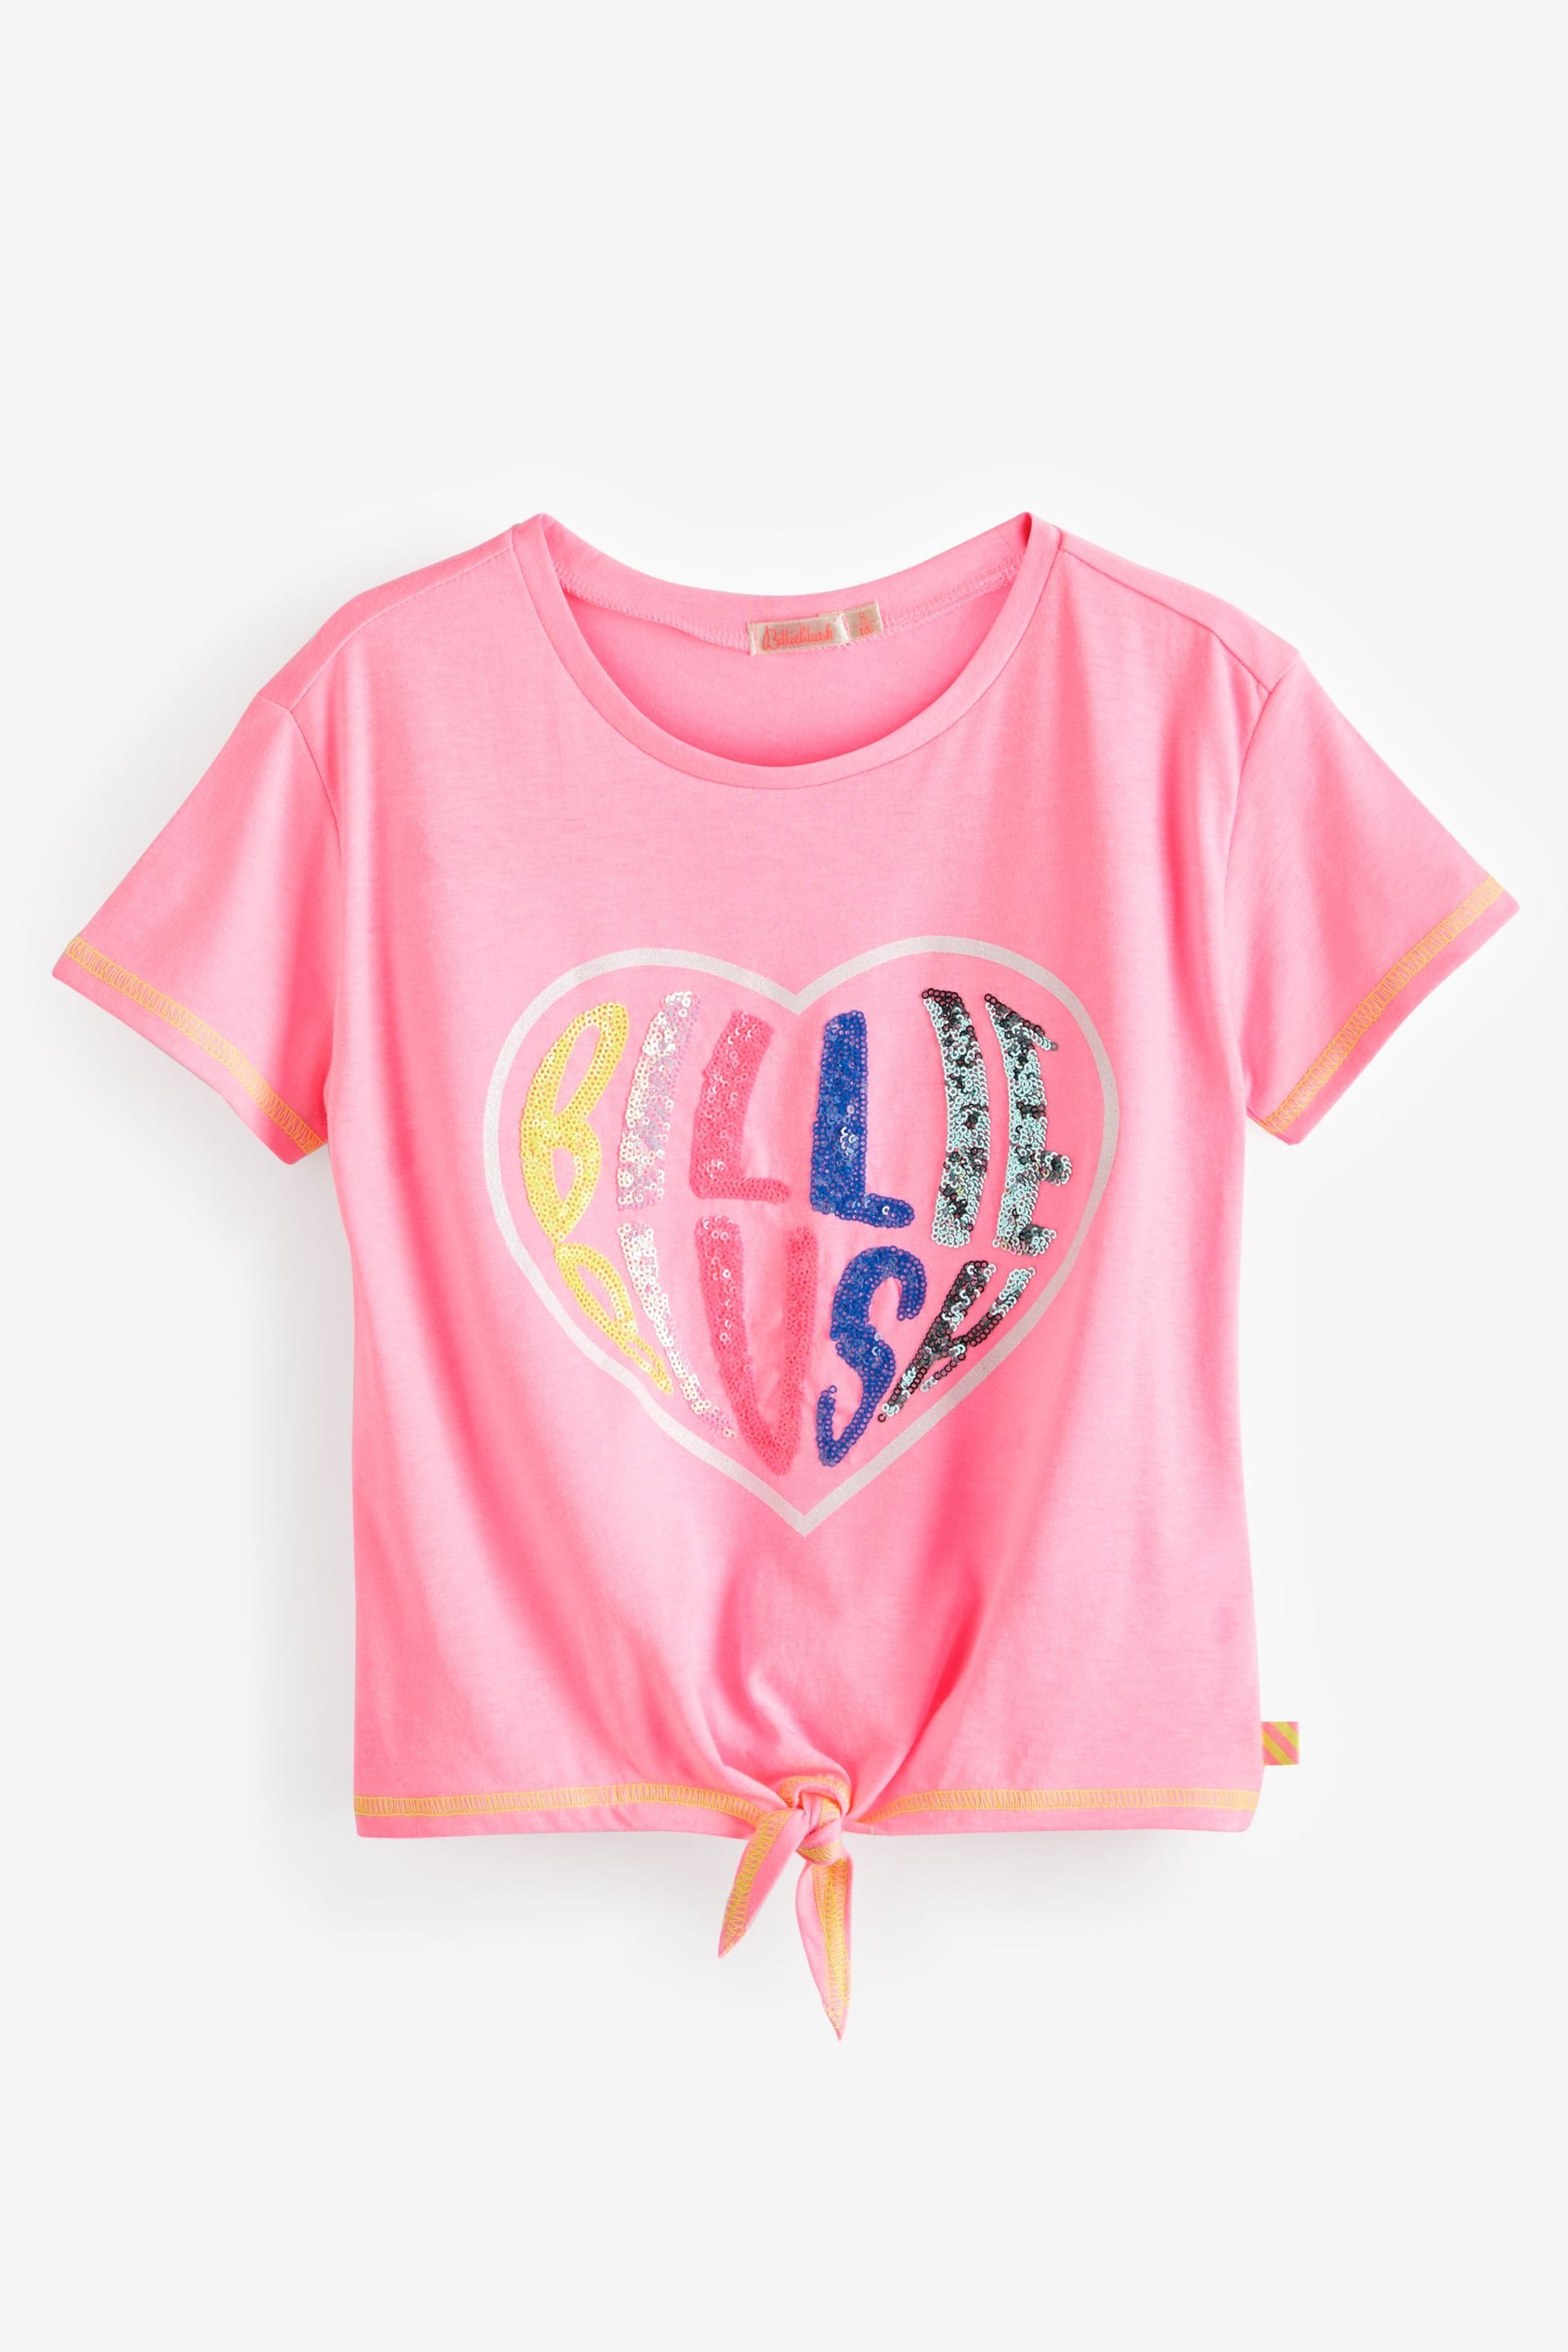 Billieblush Pink Glitter Heart Logo Cropped Tie Front T-Shirt - Image 1 of 3